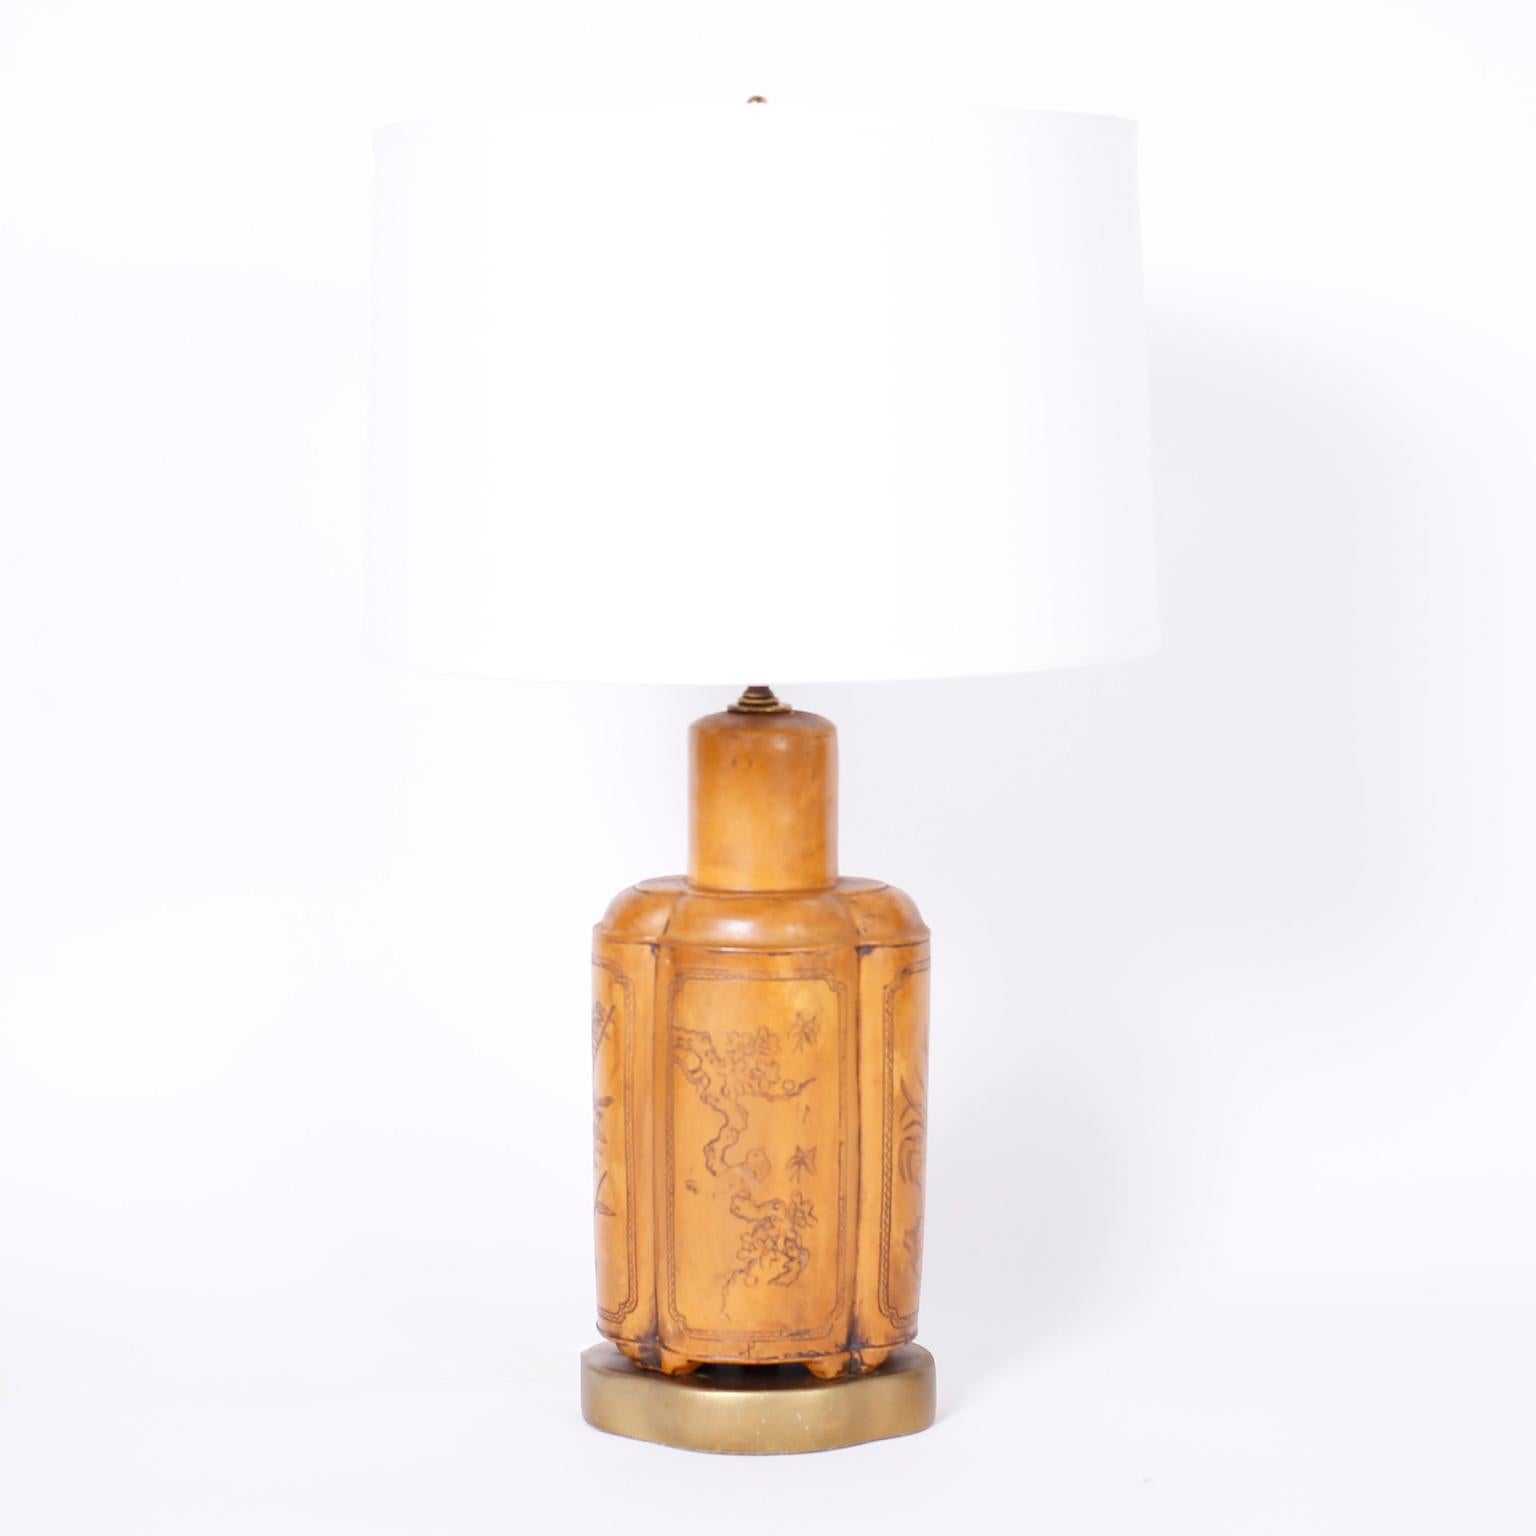 Pair of Asian Modern style table lamps crafted in composite with a Classic tea canister form and featuring a faux tooled worn leather finish presented on burnished brass bases.